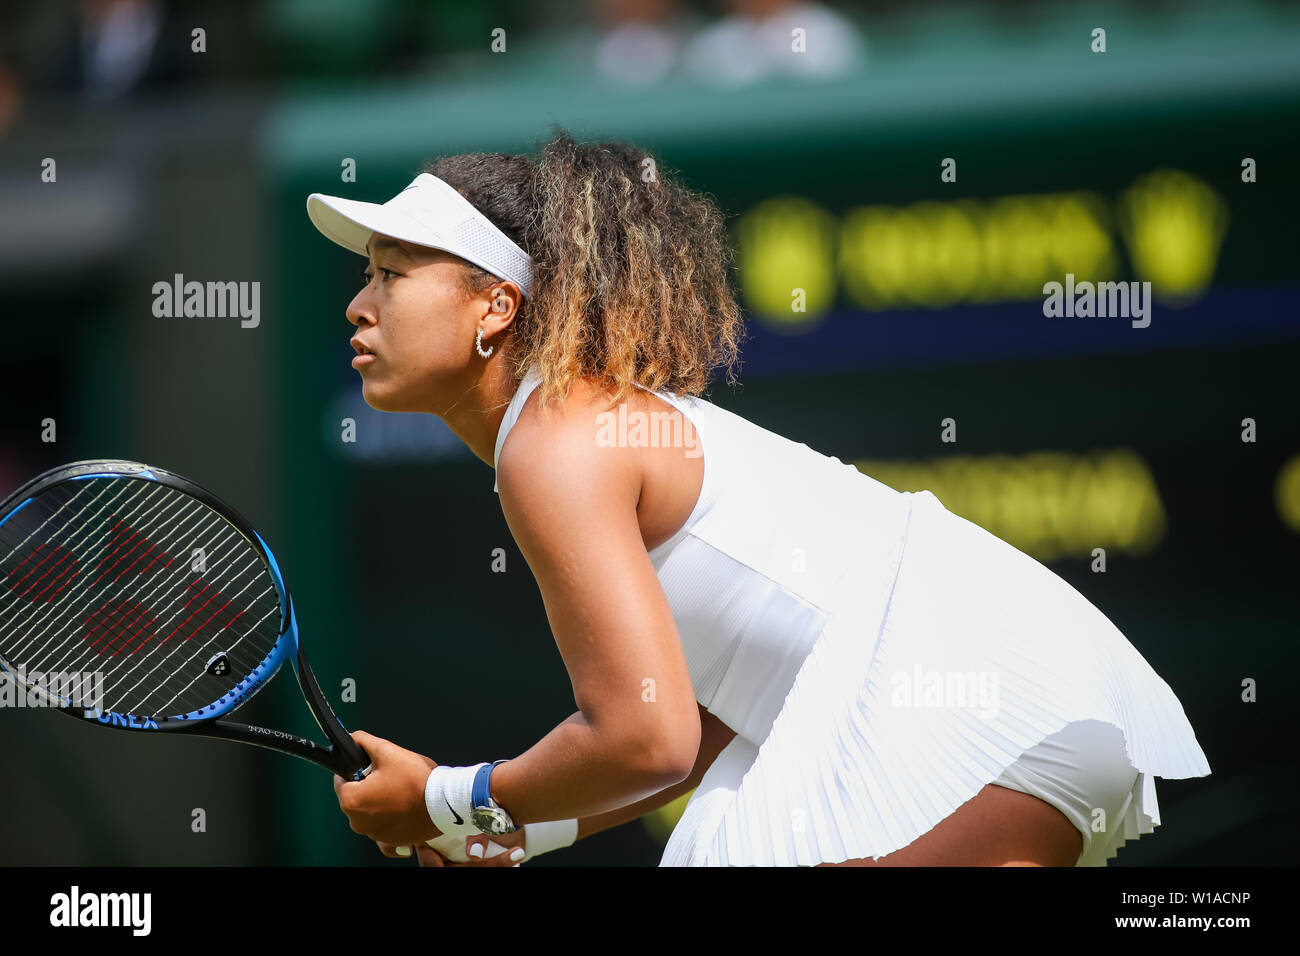 Naomi Osaka of Japan during the womens singles first round match of the Wimbledon Lawn Tennis Championships against Yulia Putintseva of Kazakhstan at the All England Lawn Tennis and Croquet Club in